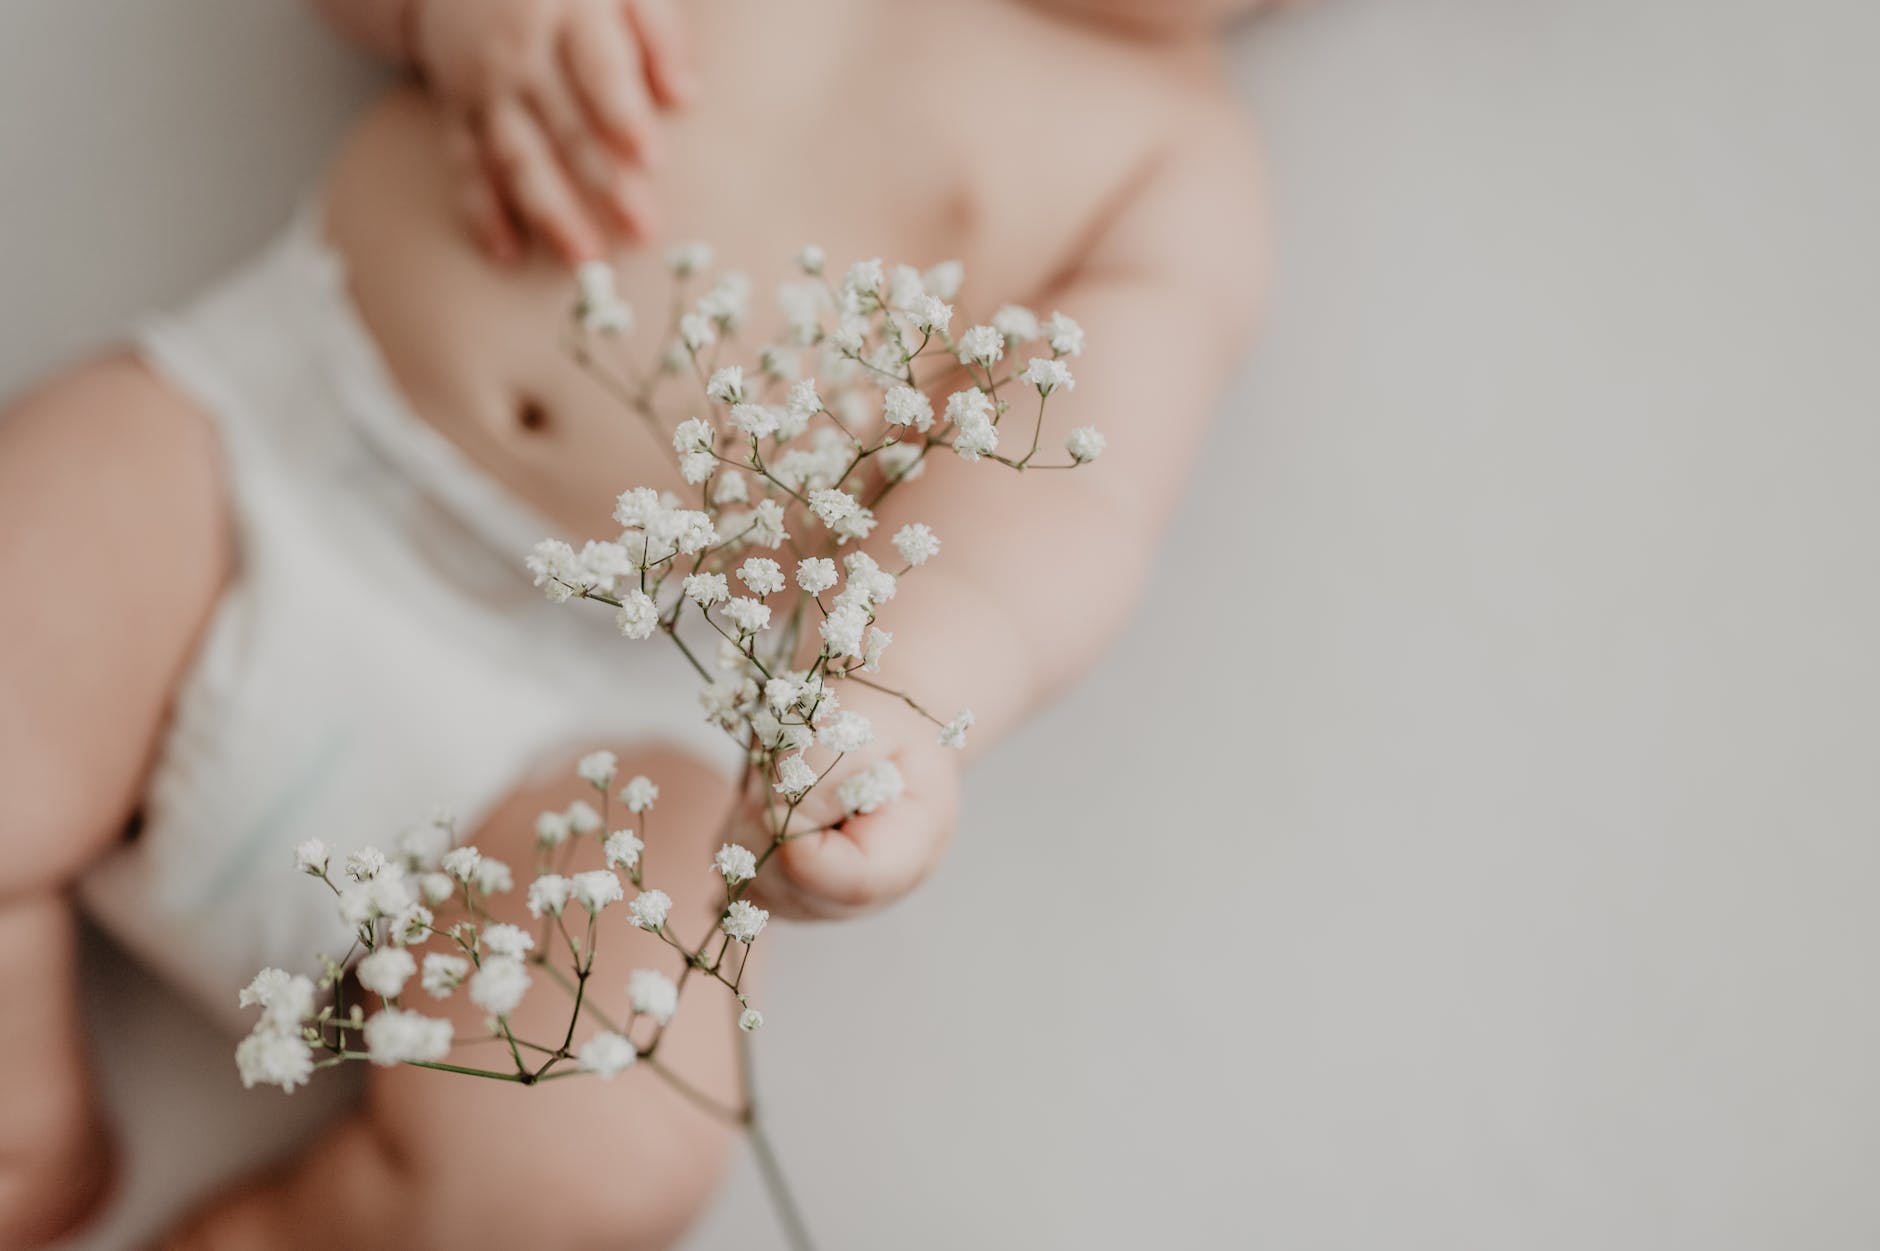 baby touching delicate flowers